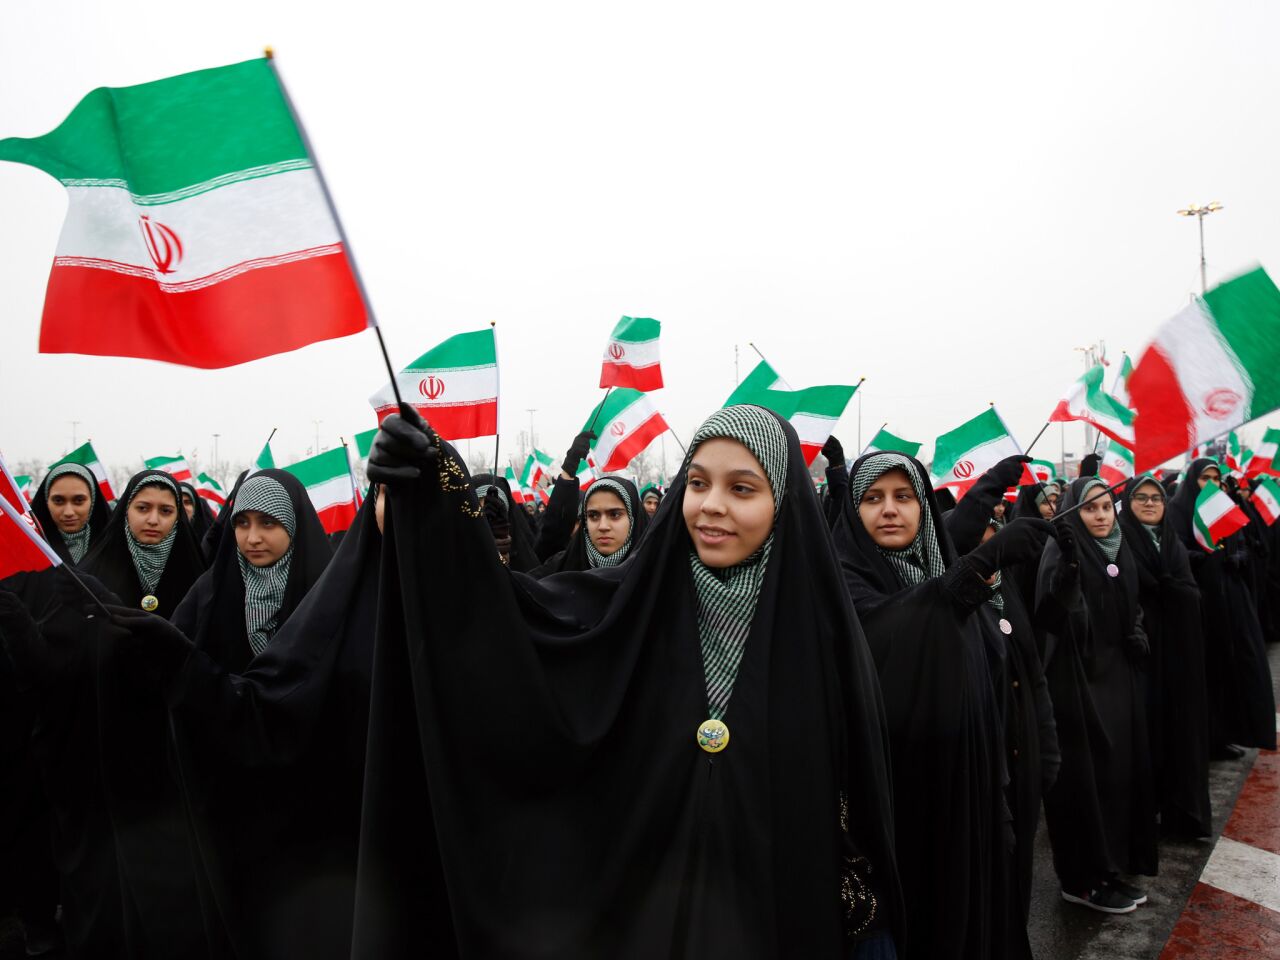 Female students wave Iranian national flags during a ceremony marking the 40th anniversary of the 1979 Islamic Revolution, at the Azadi (Freedom) square in Tehran.